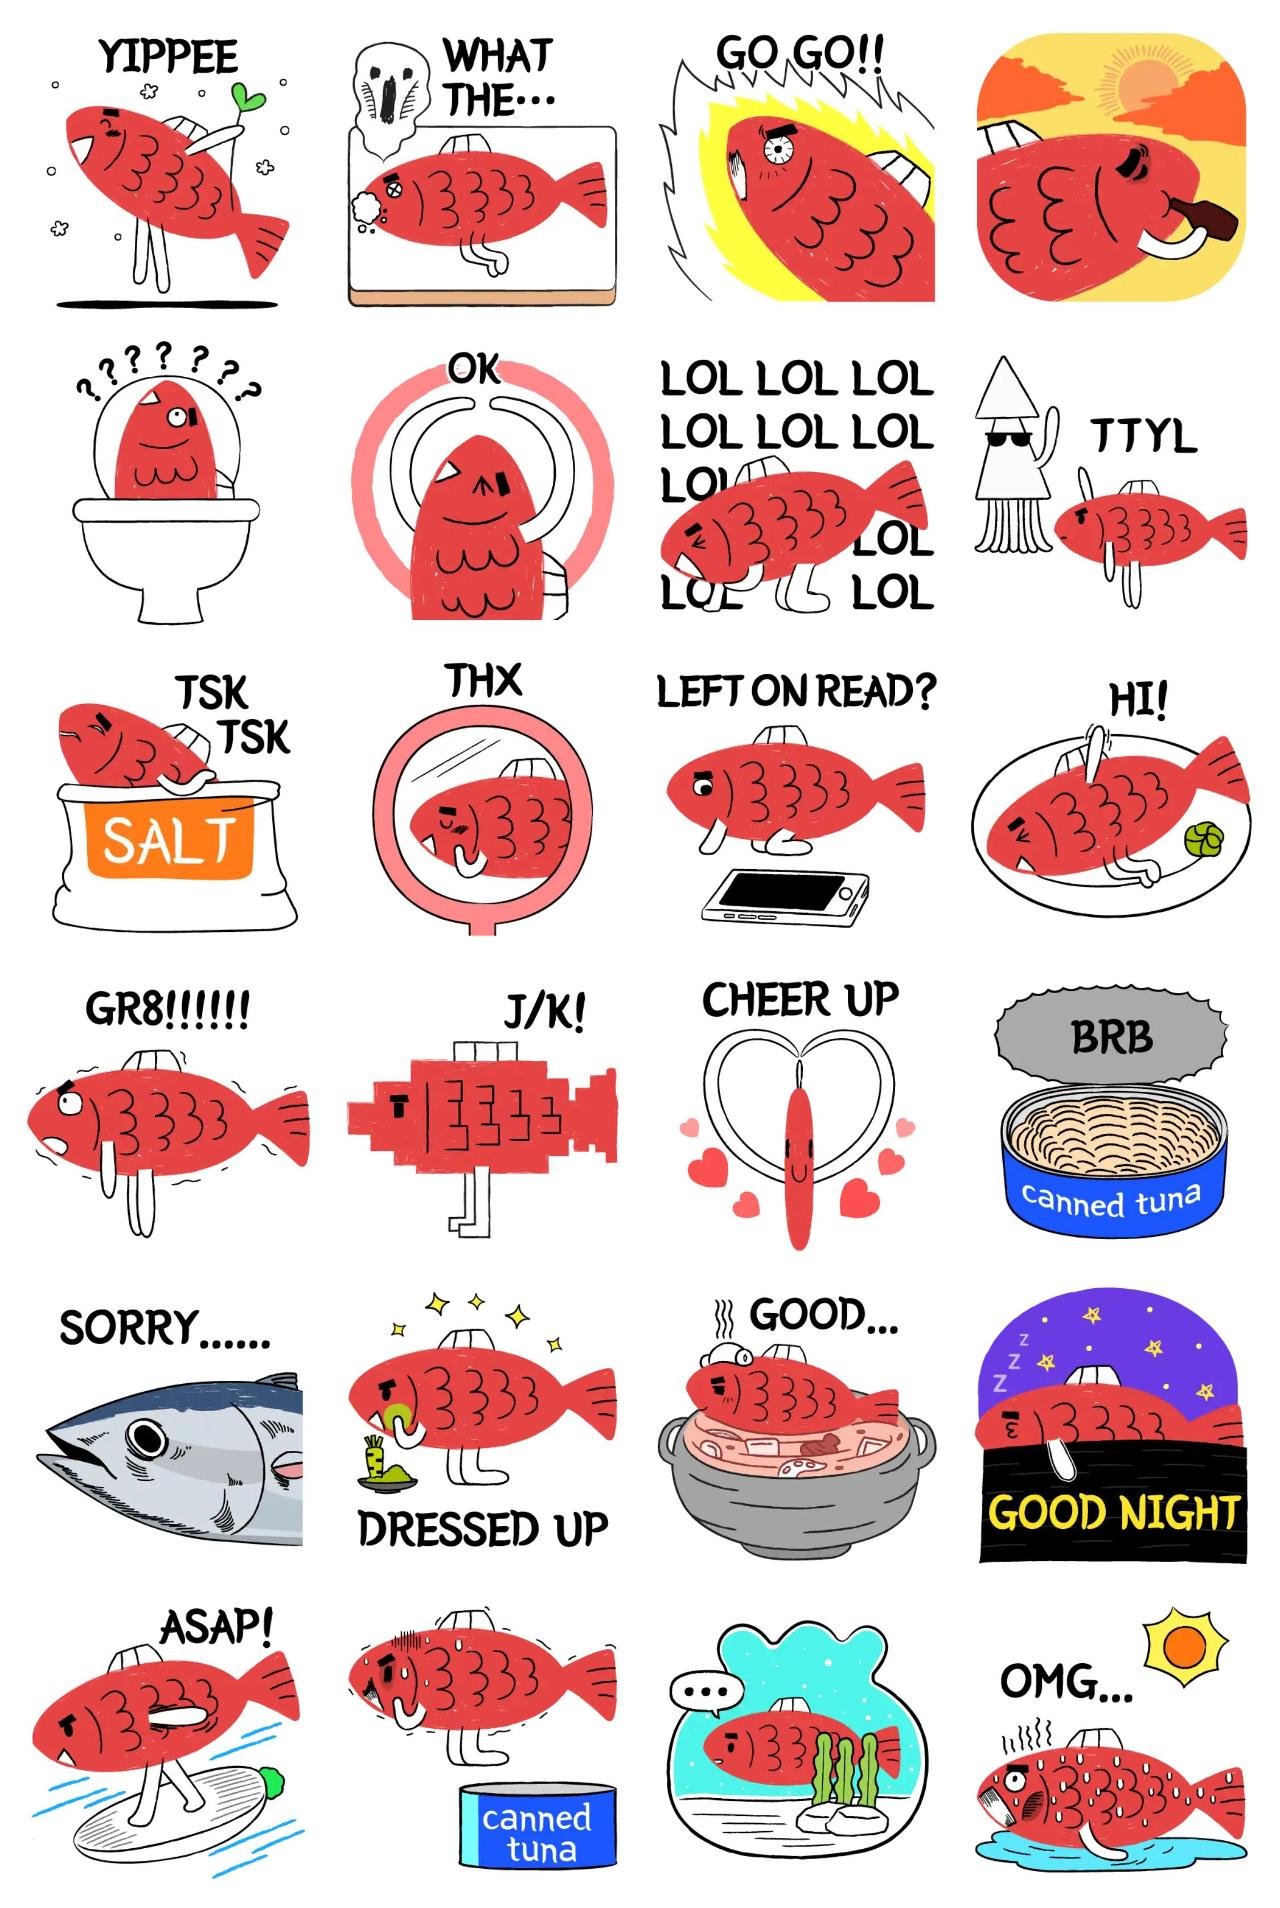 GO! GO!! TUNA BOY Animation/Cartoon sticker pack for Whatsapp, Telegram, Signal, and others chatting and message apps